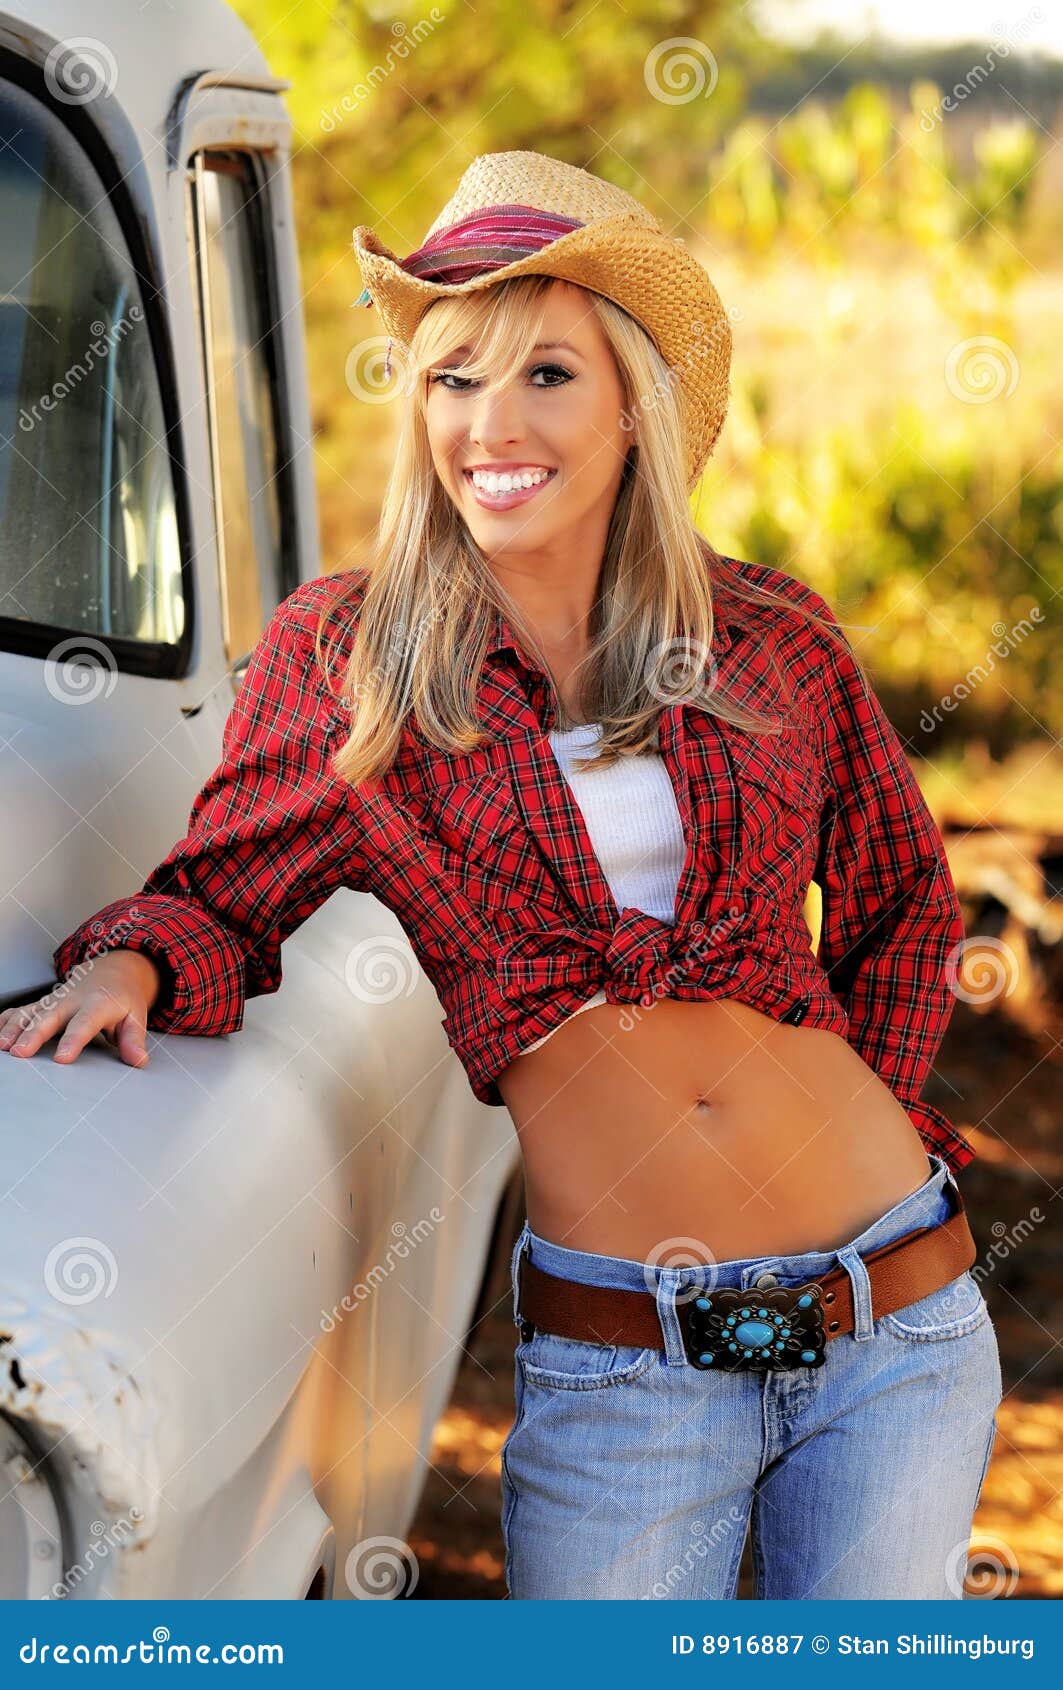 Country only girl a Dreams of